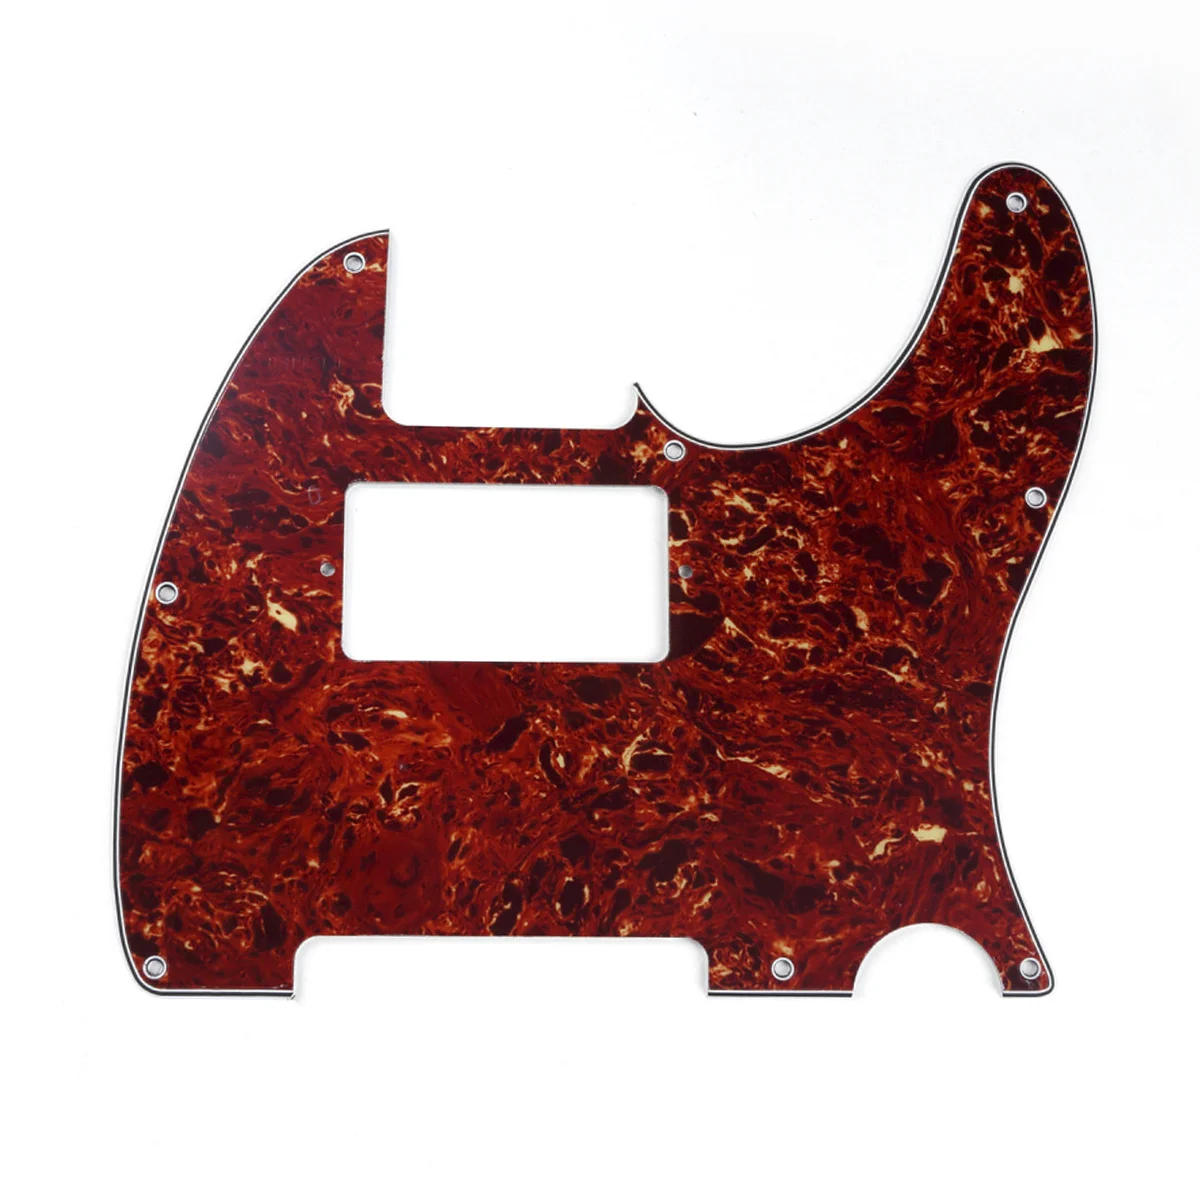 

Musiclily 8 Hole Guitar Tele Pickguard Humbucker HH for USA/Mexican Made Fender Standard Telecaster Style, 4Ply Vintage Tortoise